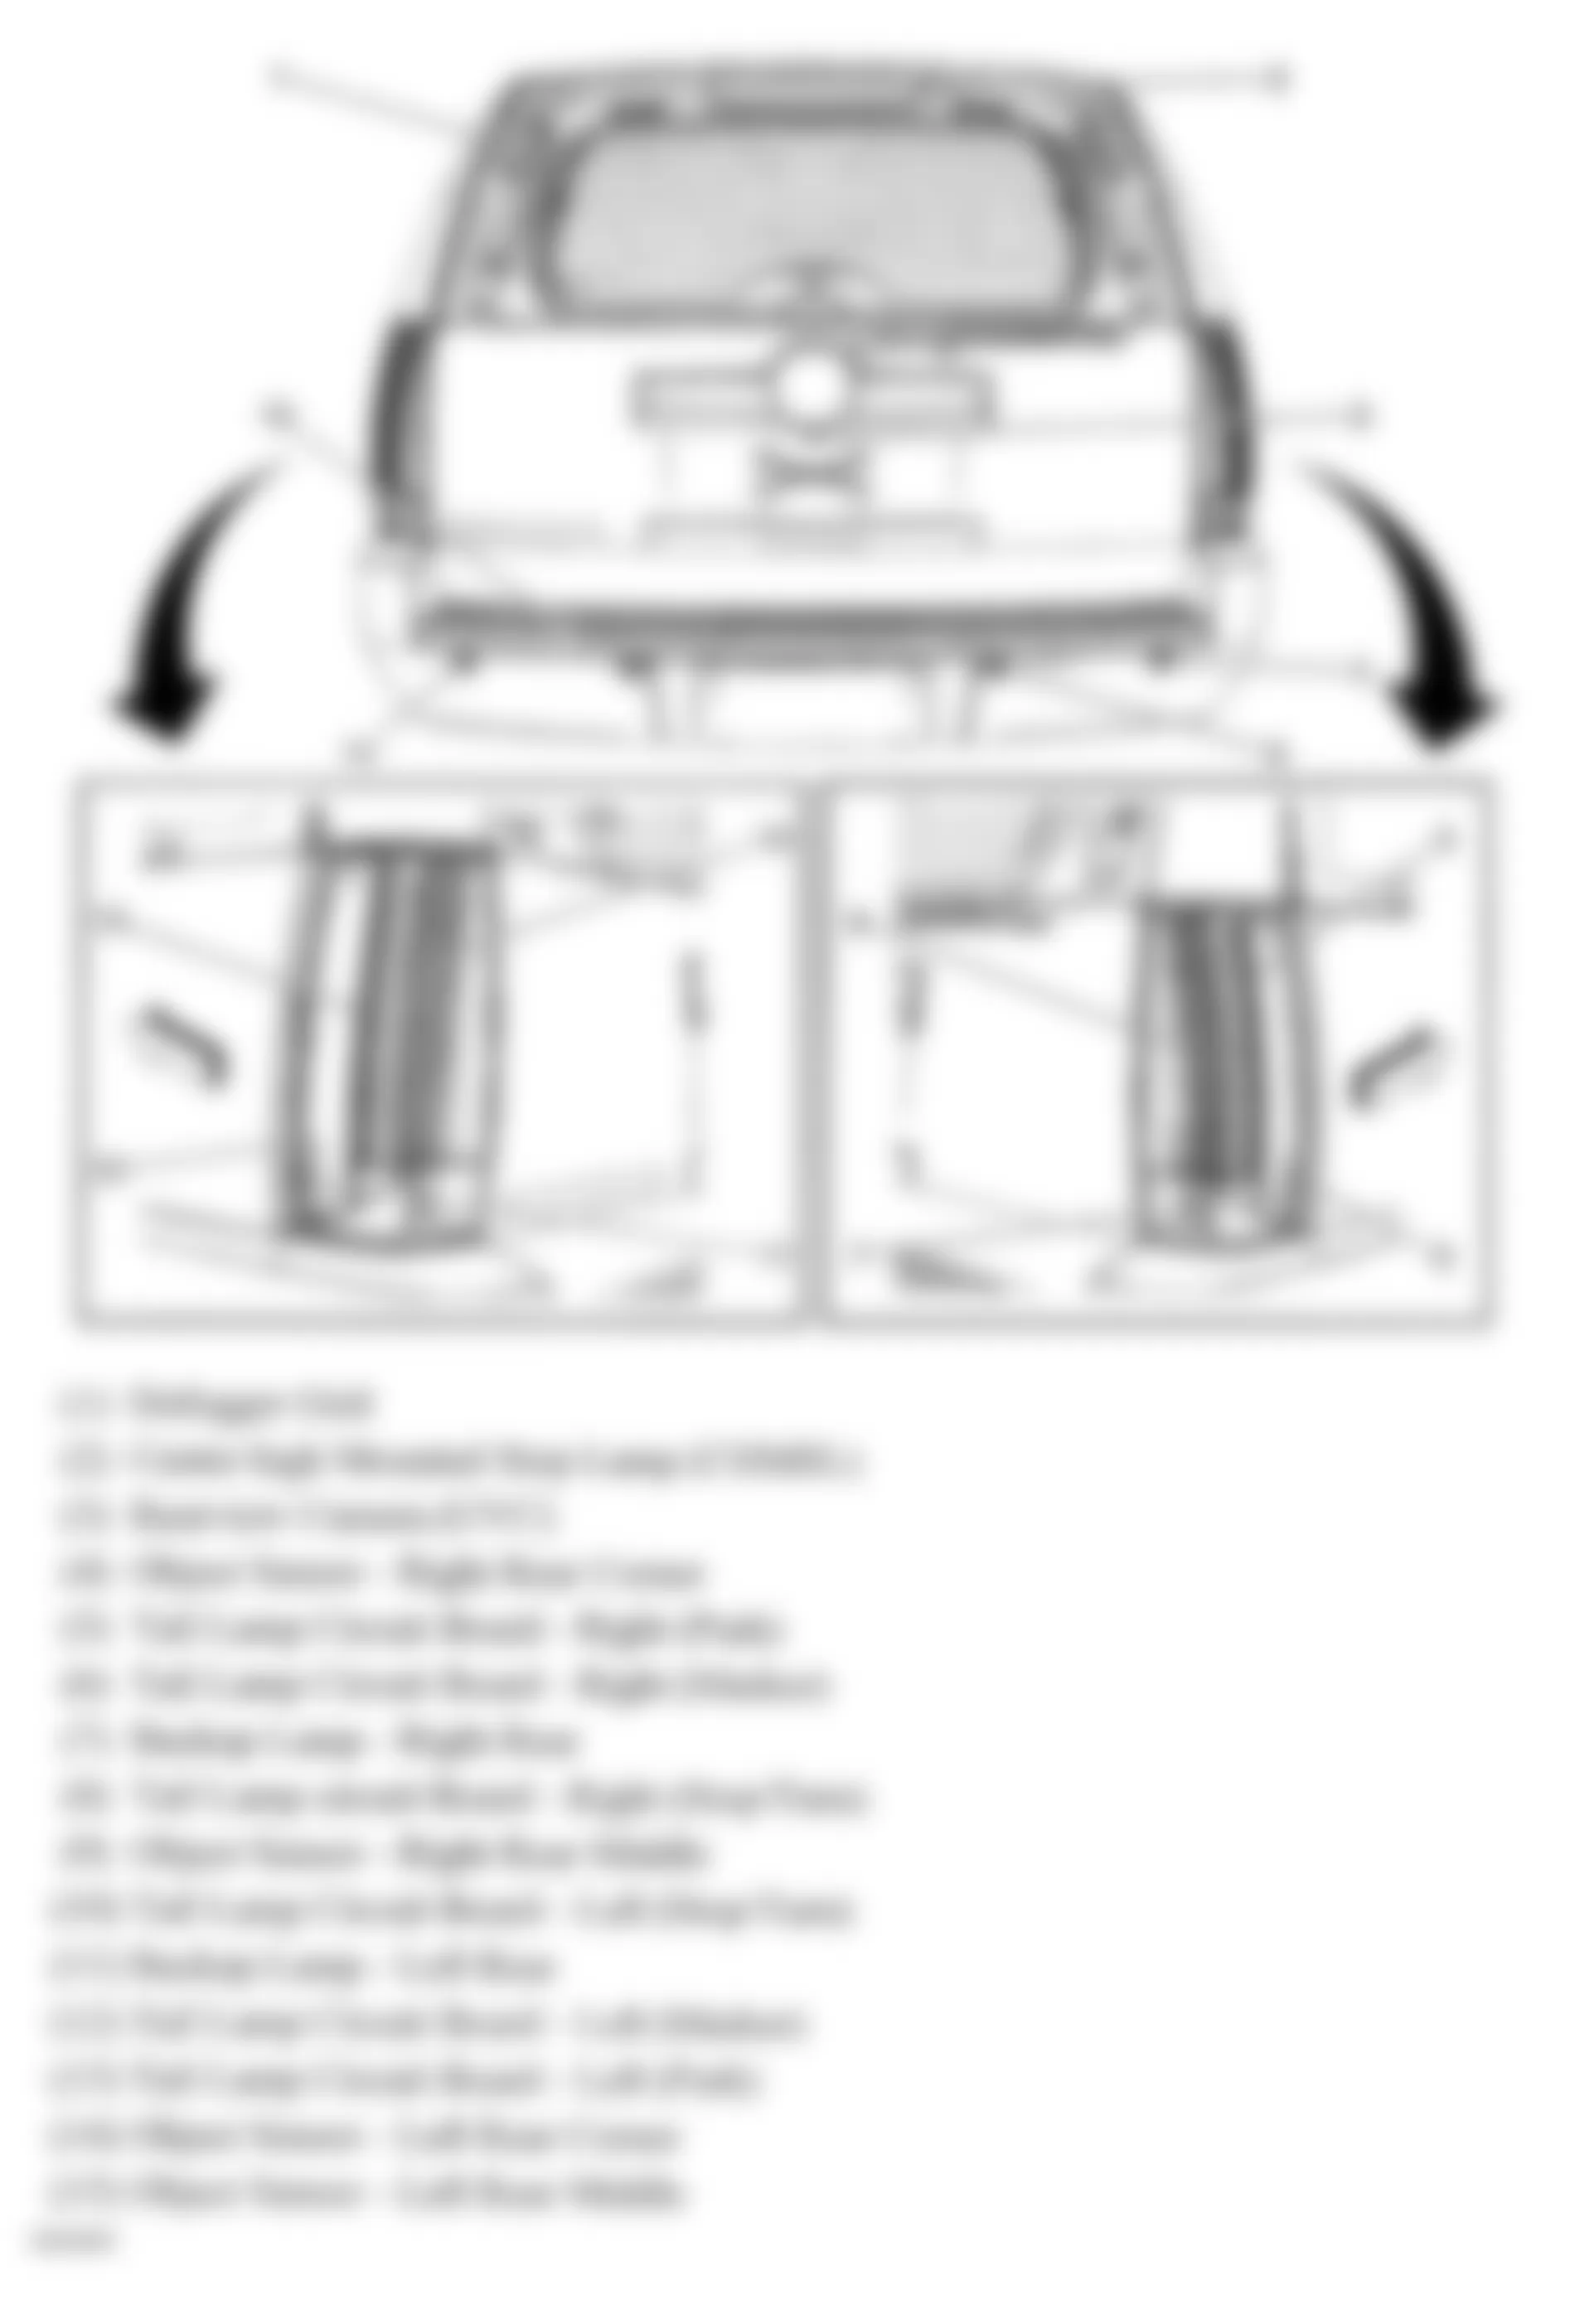 GMC Yukon 2009 - Component Locations -  Rear Of Vehicle (Tahoe & Escalade W/One Piece Liftgate)